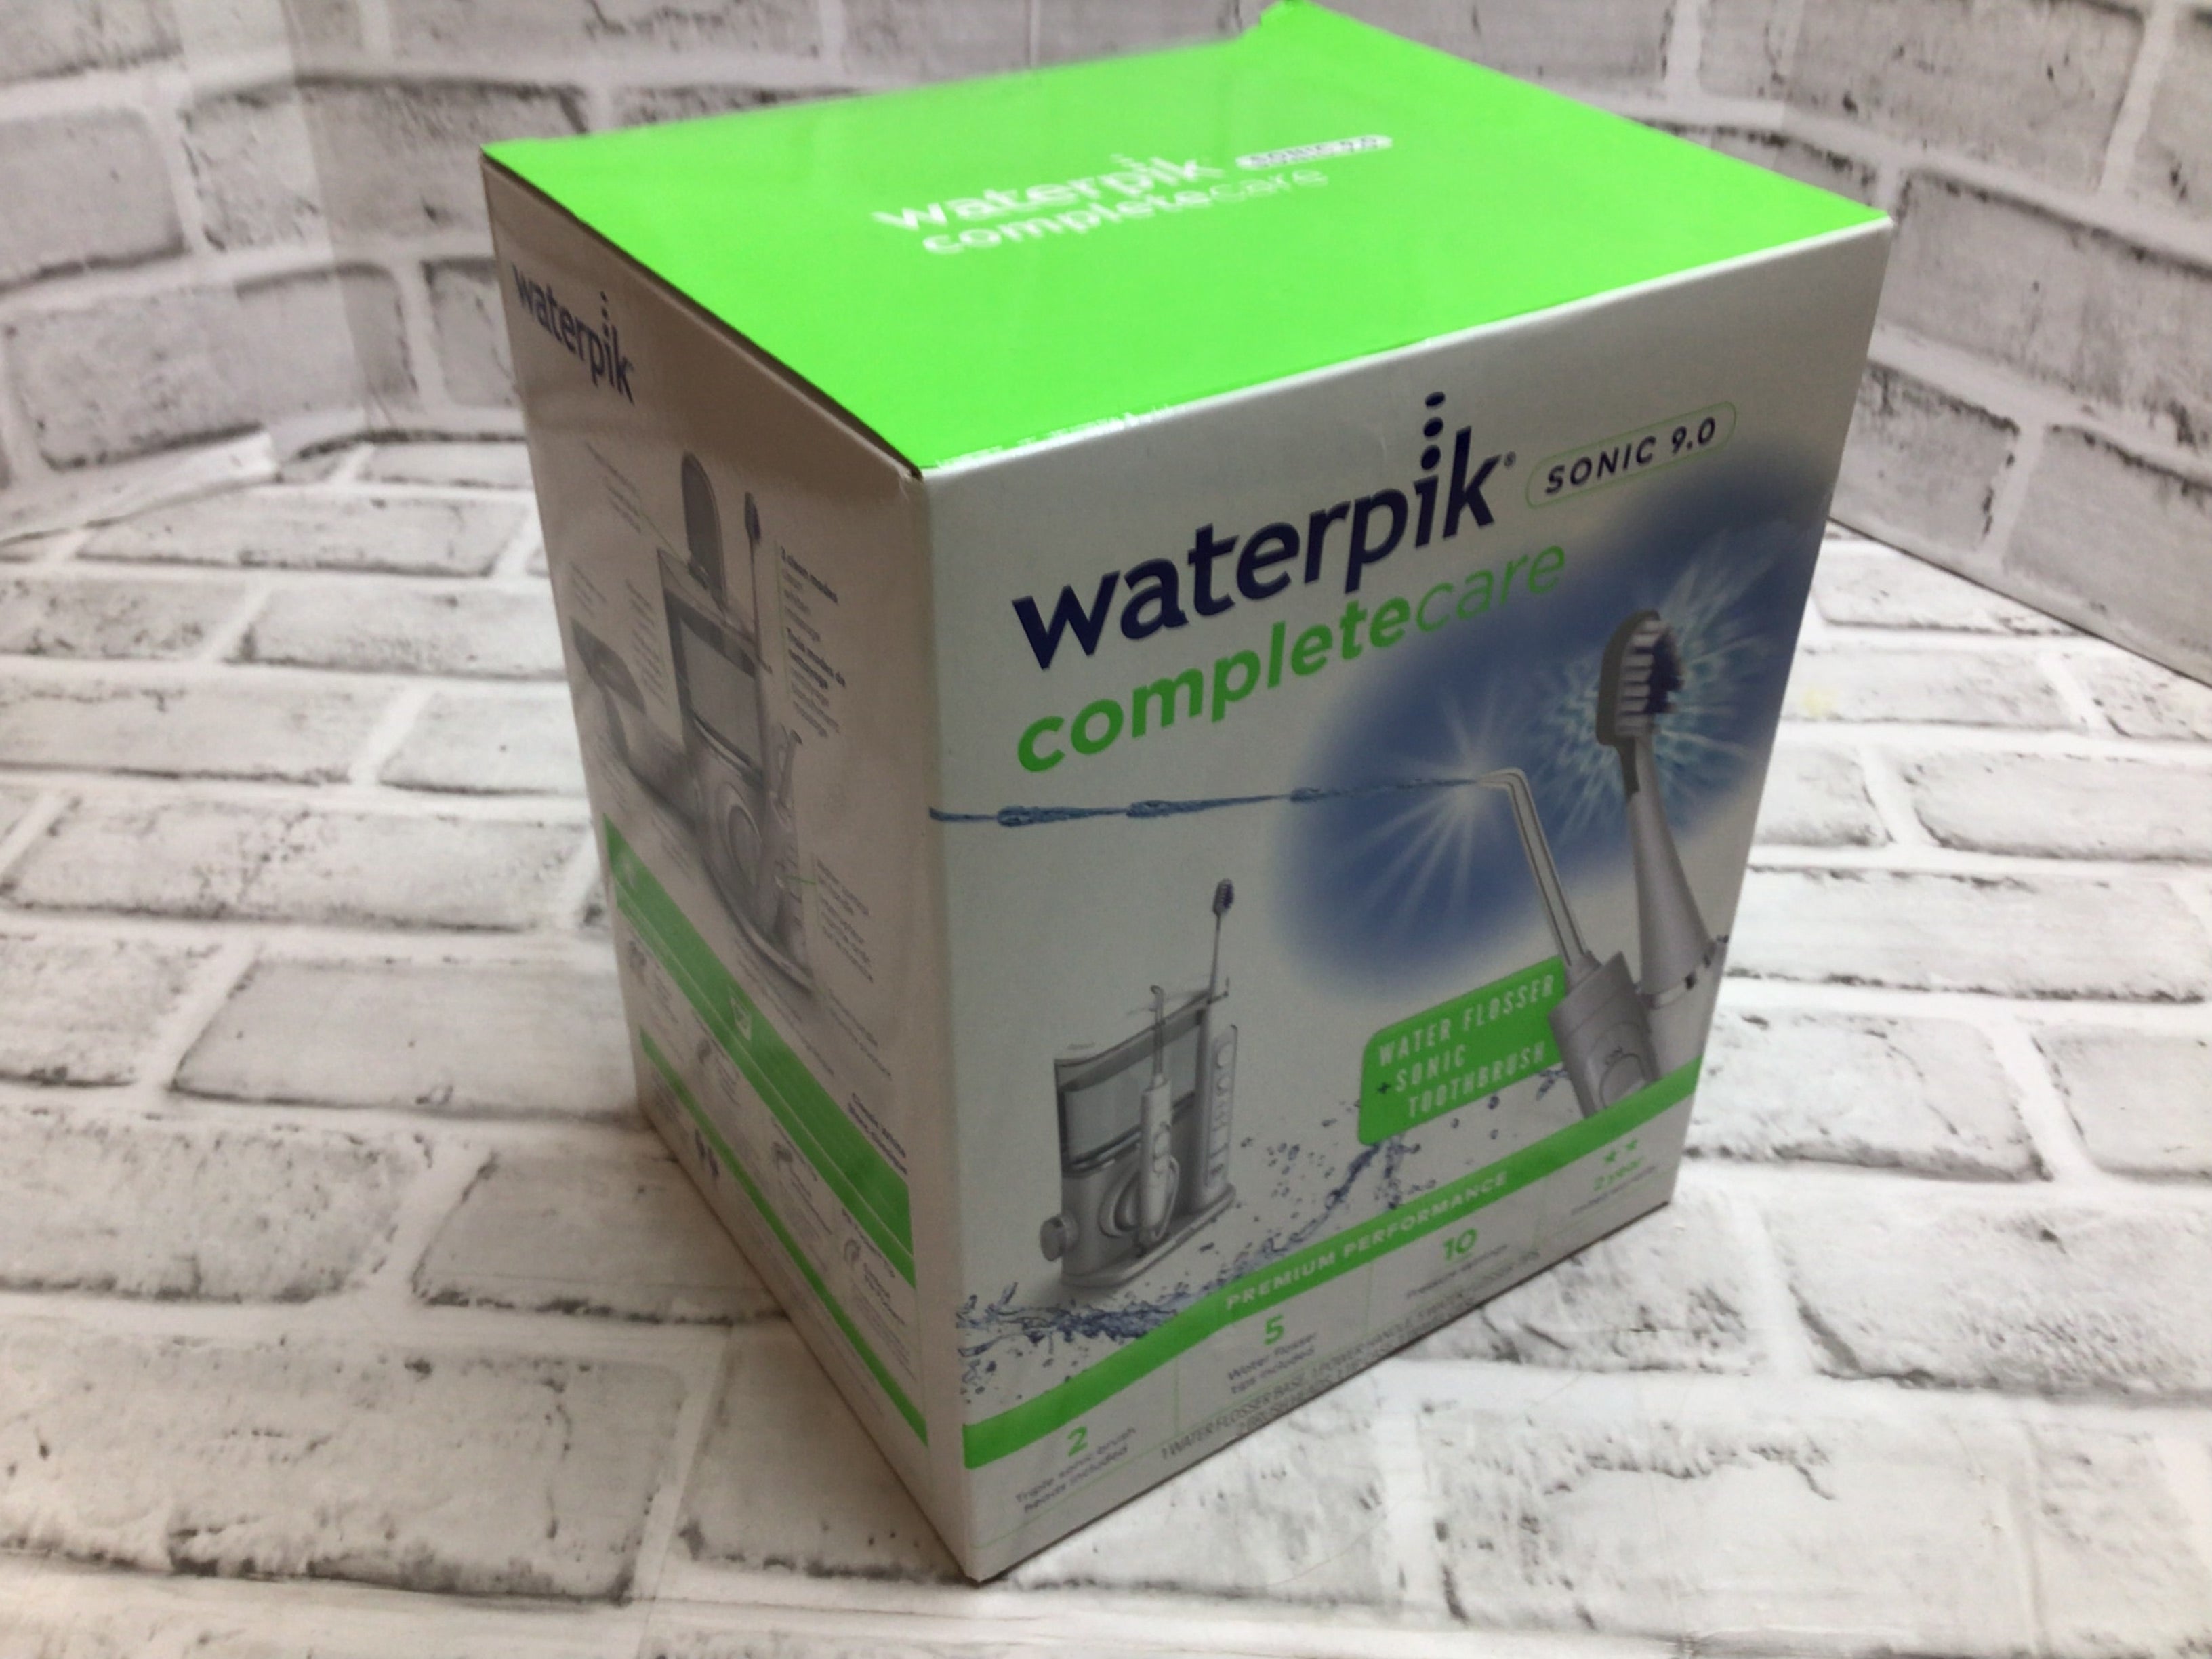 New Waterpik Complete Care 9.0 Sonic Electric Toothbrush & Water Flosser Sealed (8087168549102)